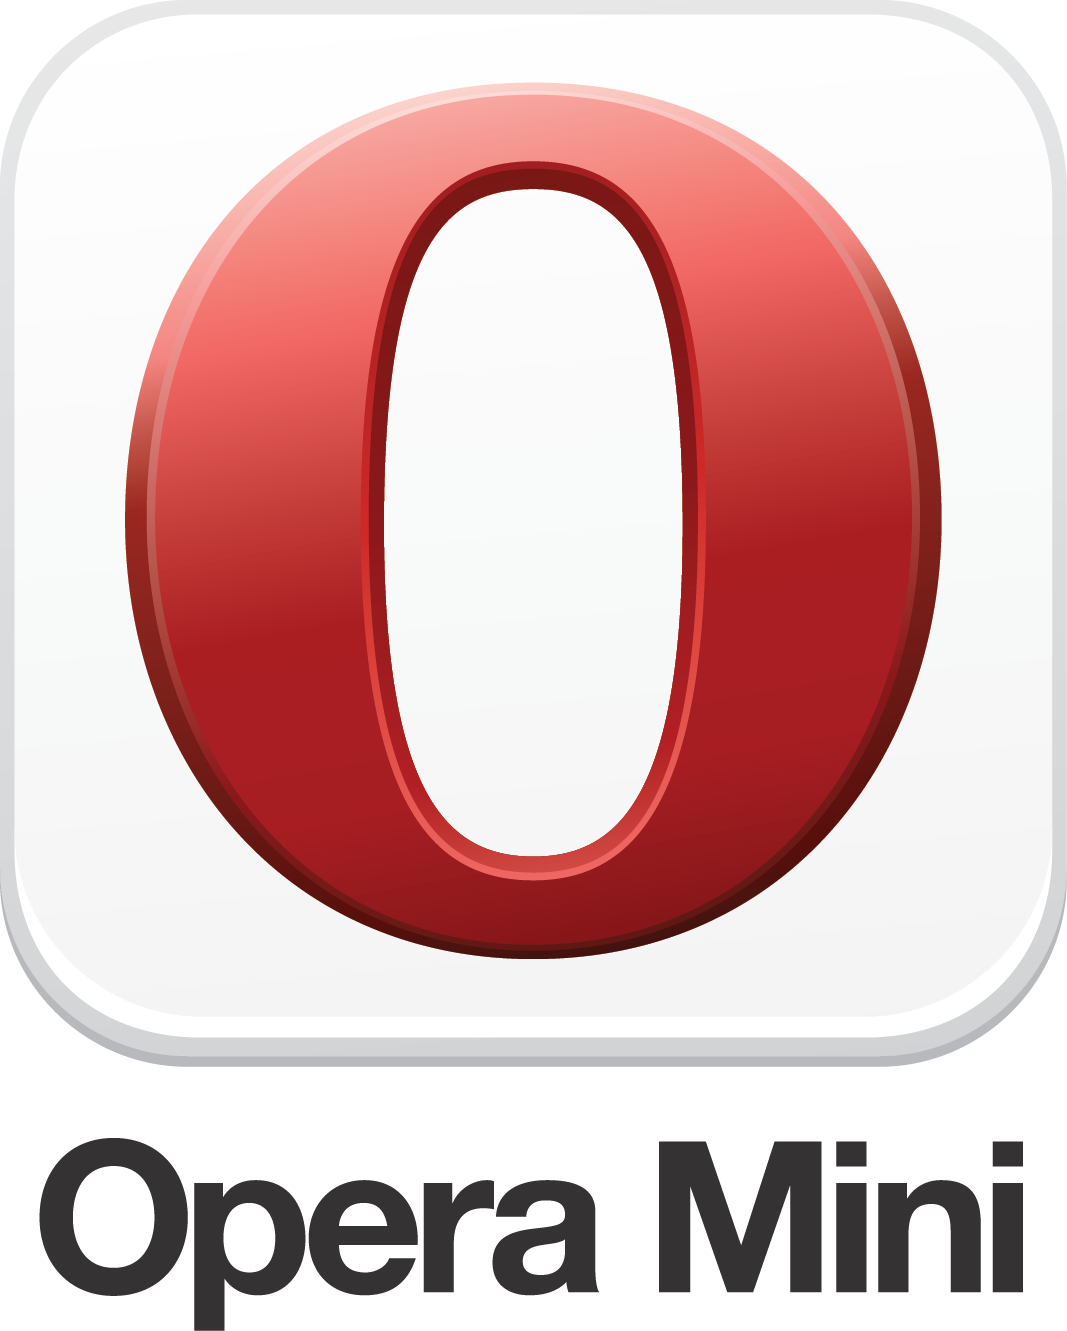 Opera Mini 7.5.3.apk for android free download - Download Full Version ...